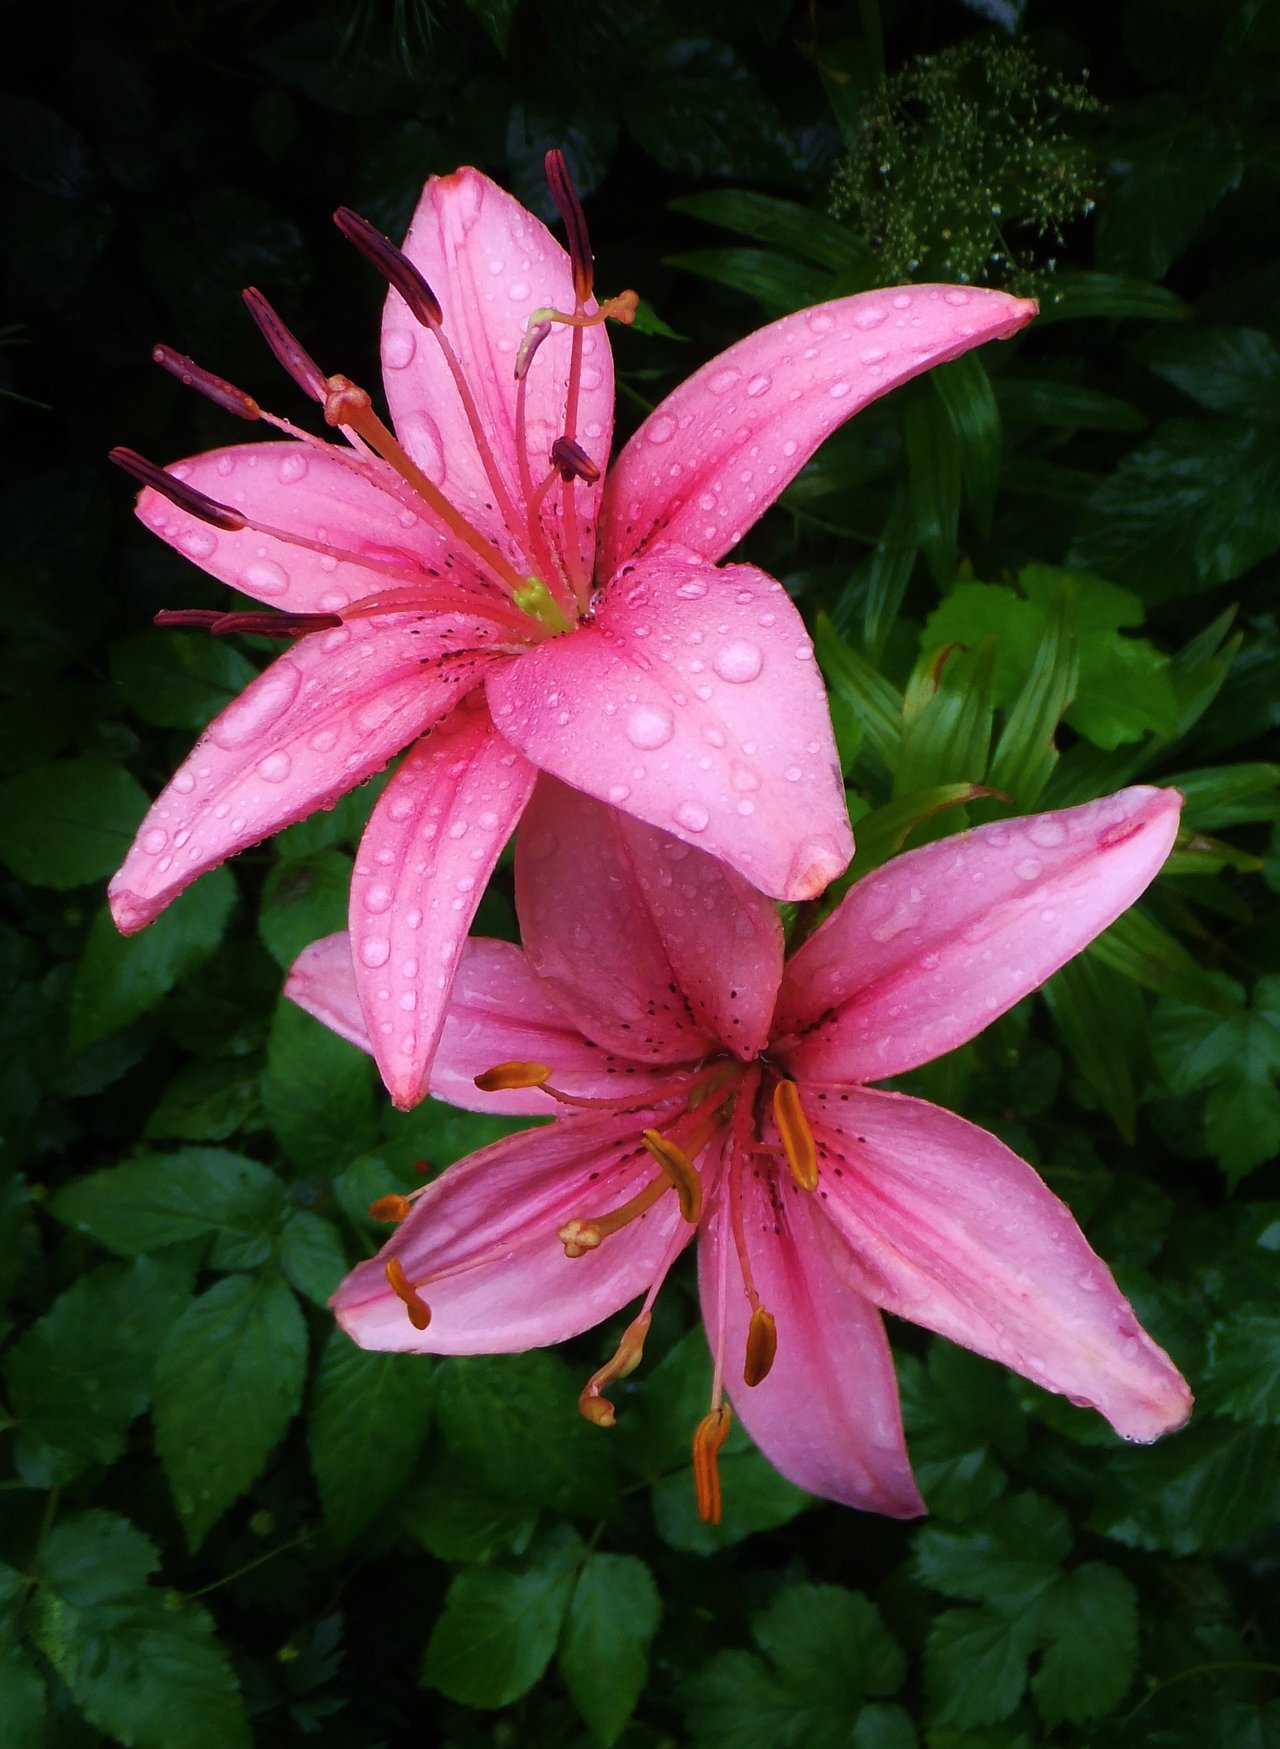 Pink Lilies by MP-Tuomela on DeviantArt